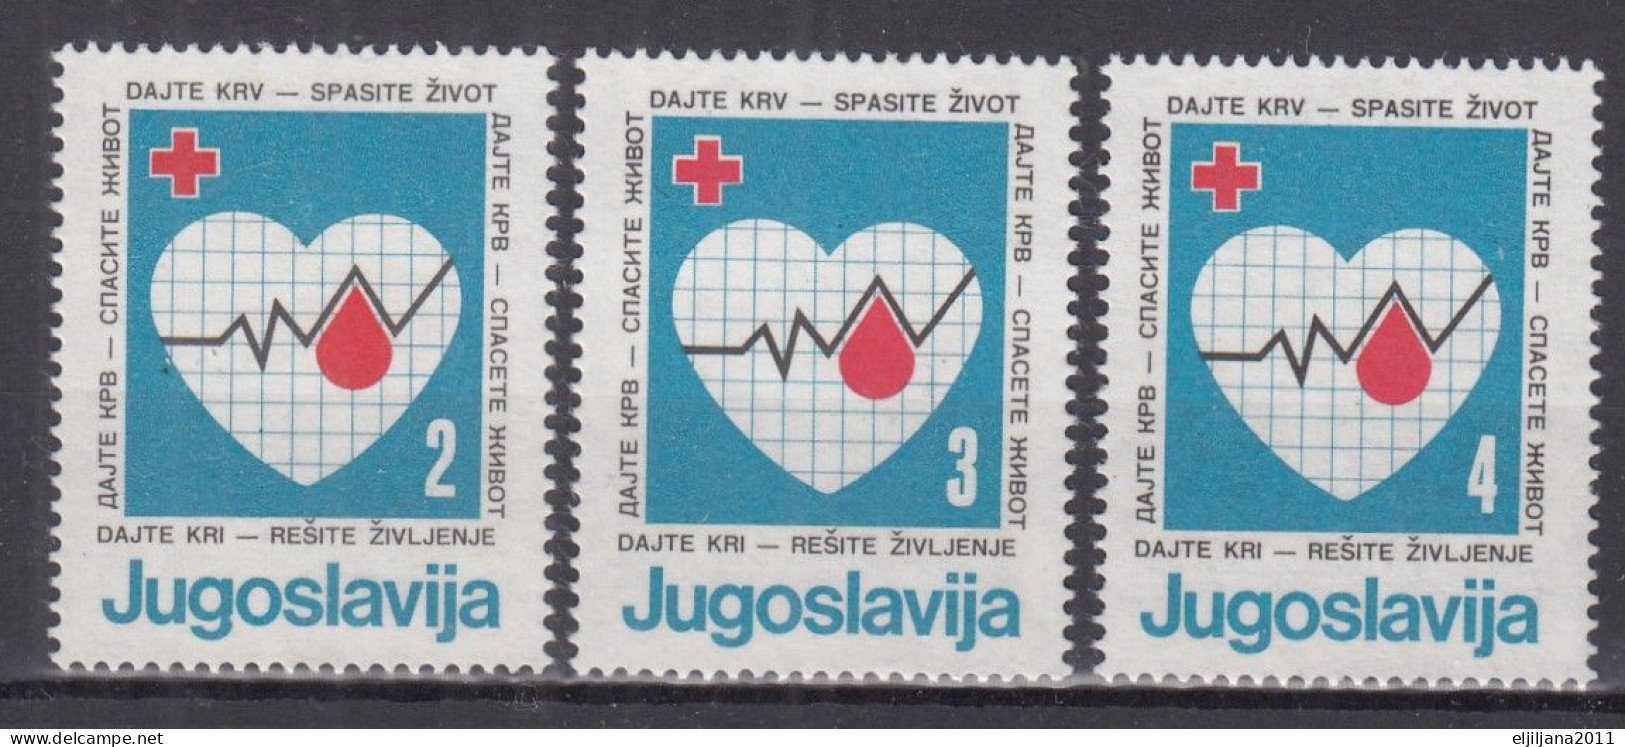 ⁕ Yugoslavia 1986 ⁕ Red Cross / Give Blood - Save A Life Mi.105-107 ⁕ 3v Unused - Beneficenza